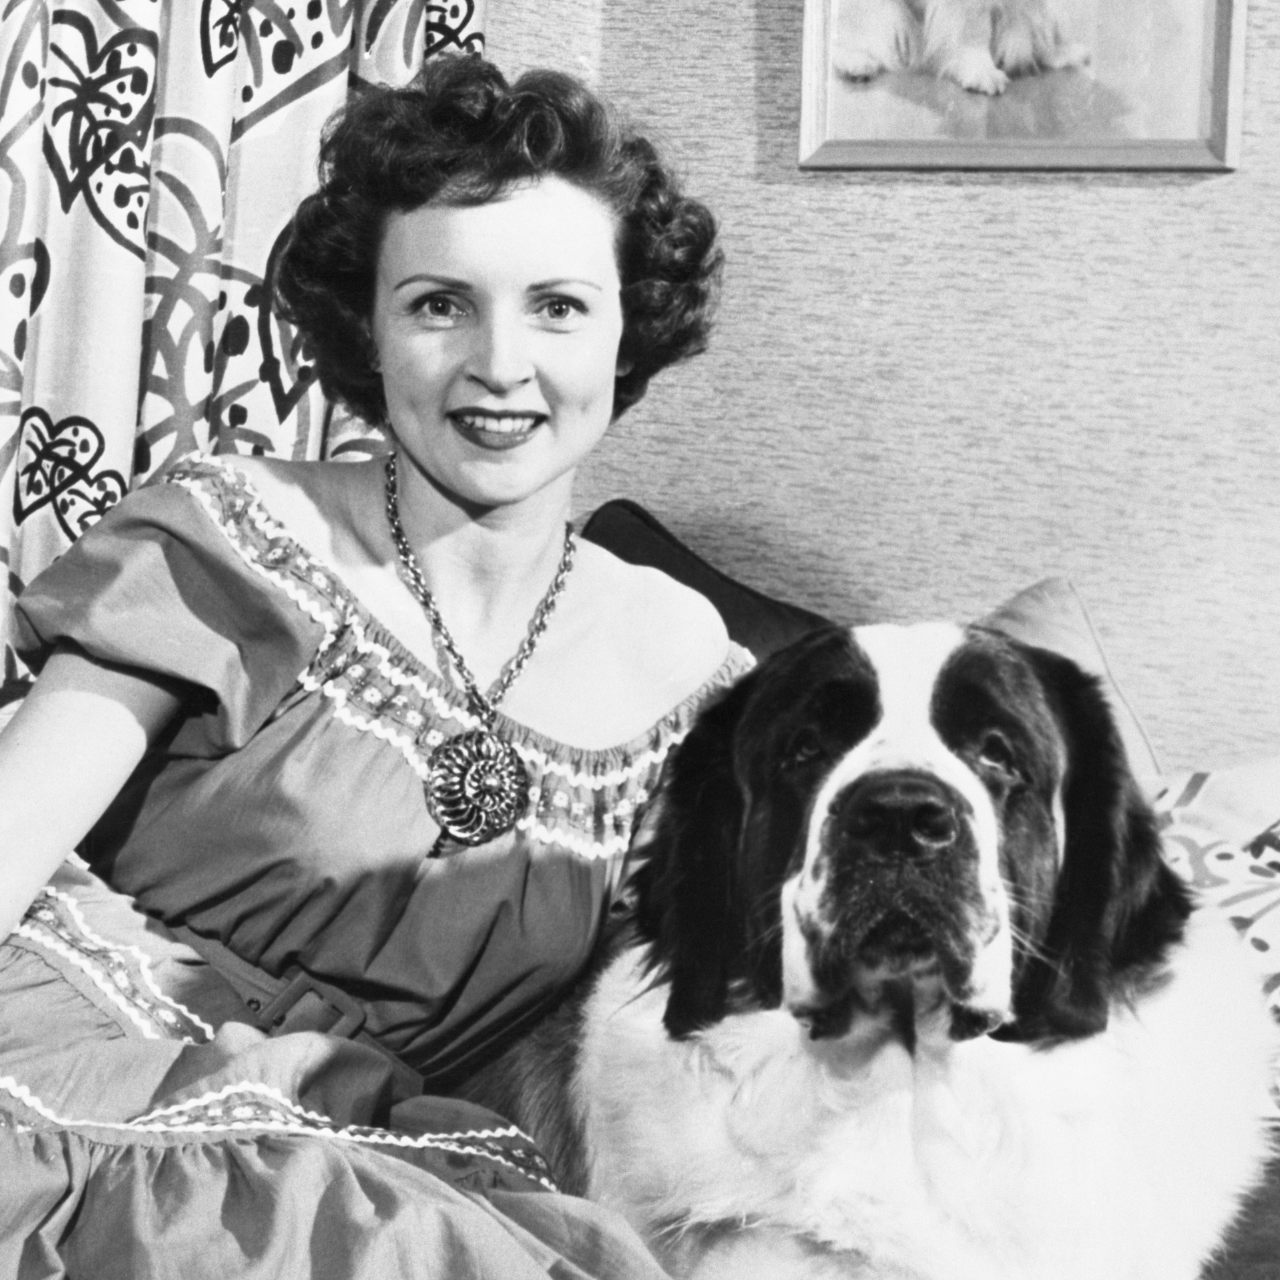 Betty White with Stormy her St. Bernard